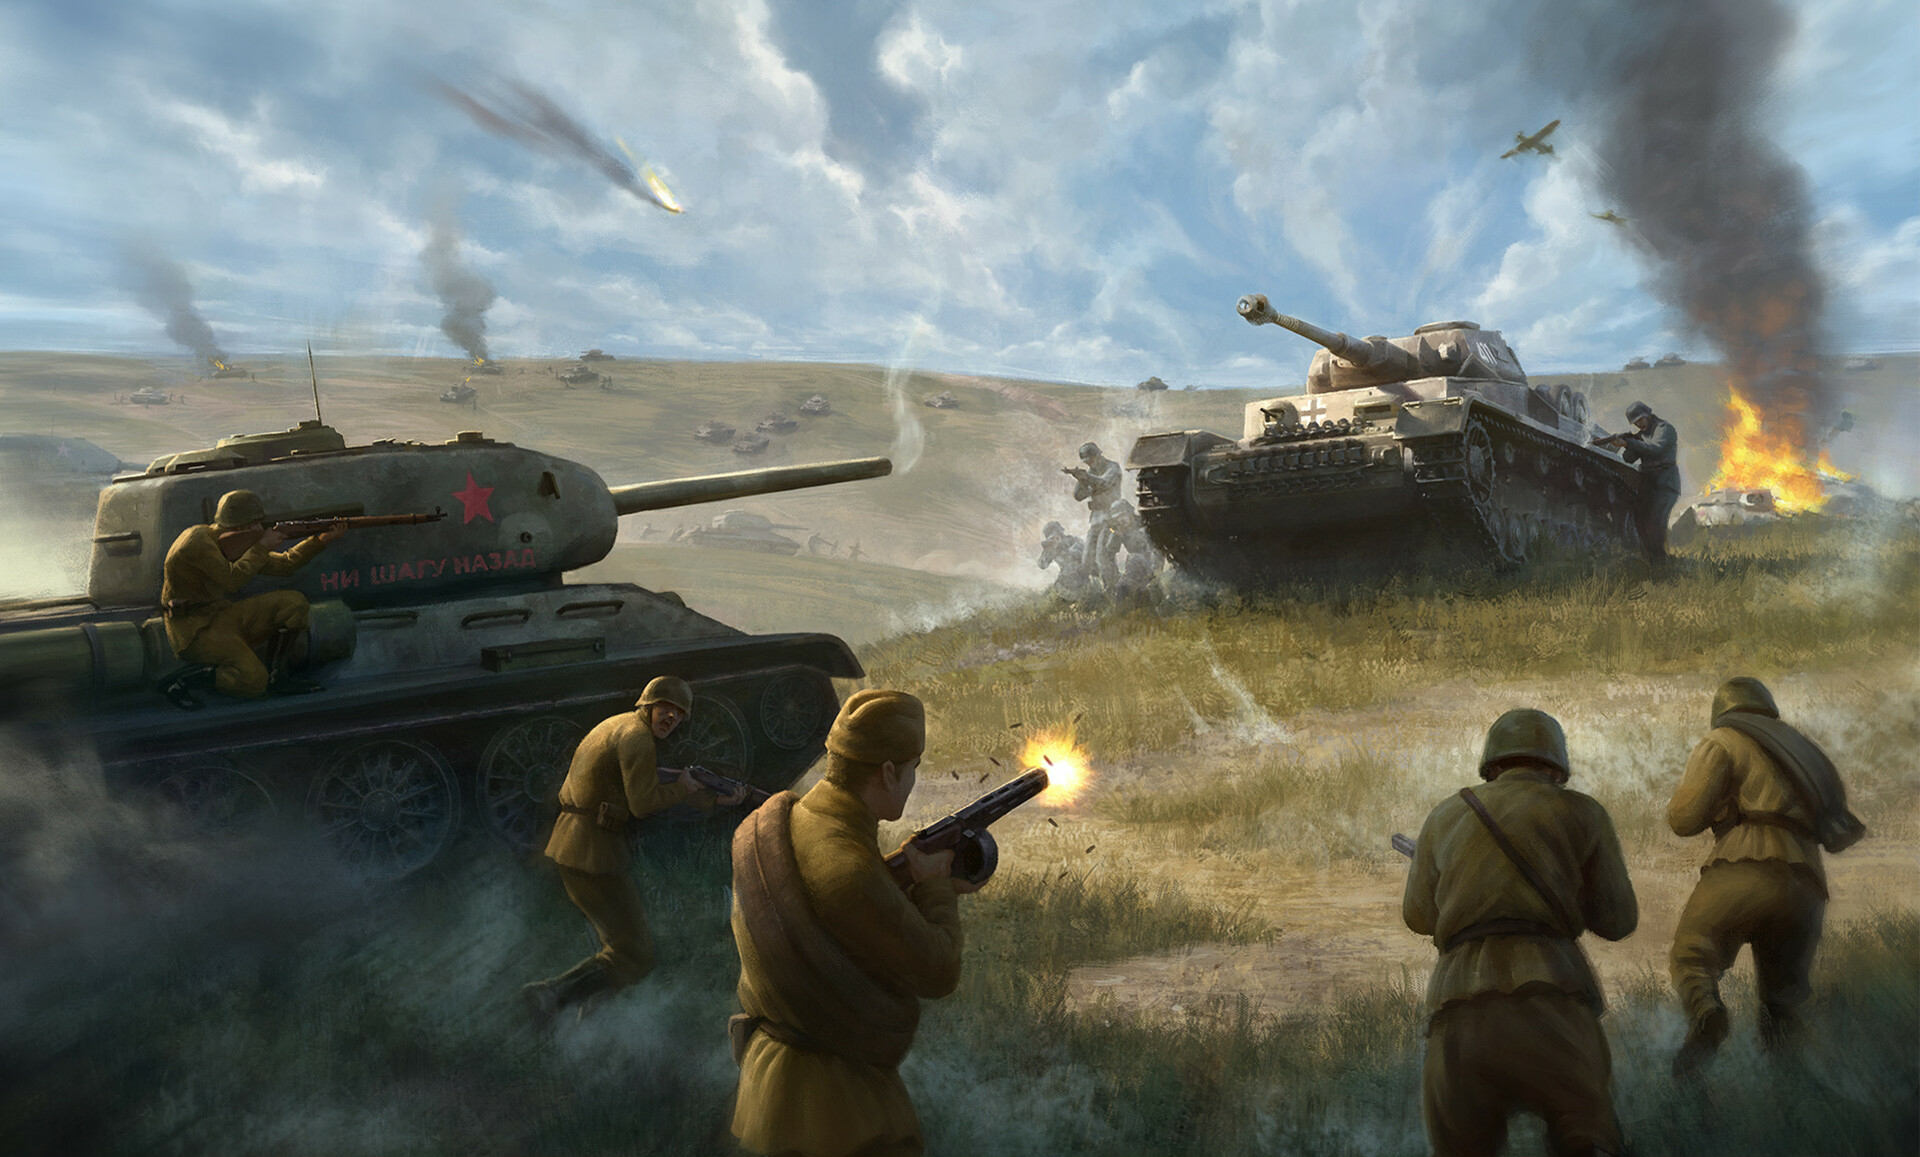 Hearts of Iron IV: No Step Back by Sam Carr